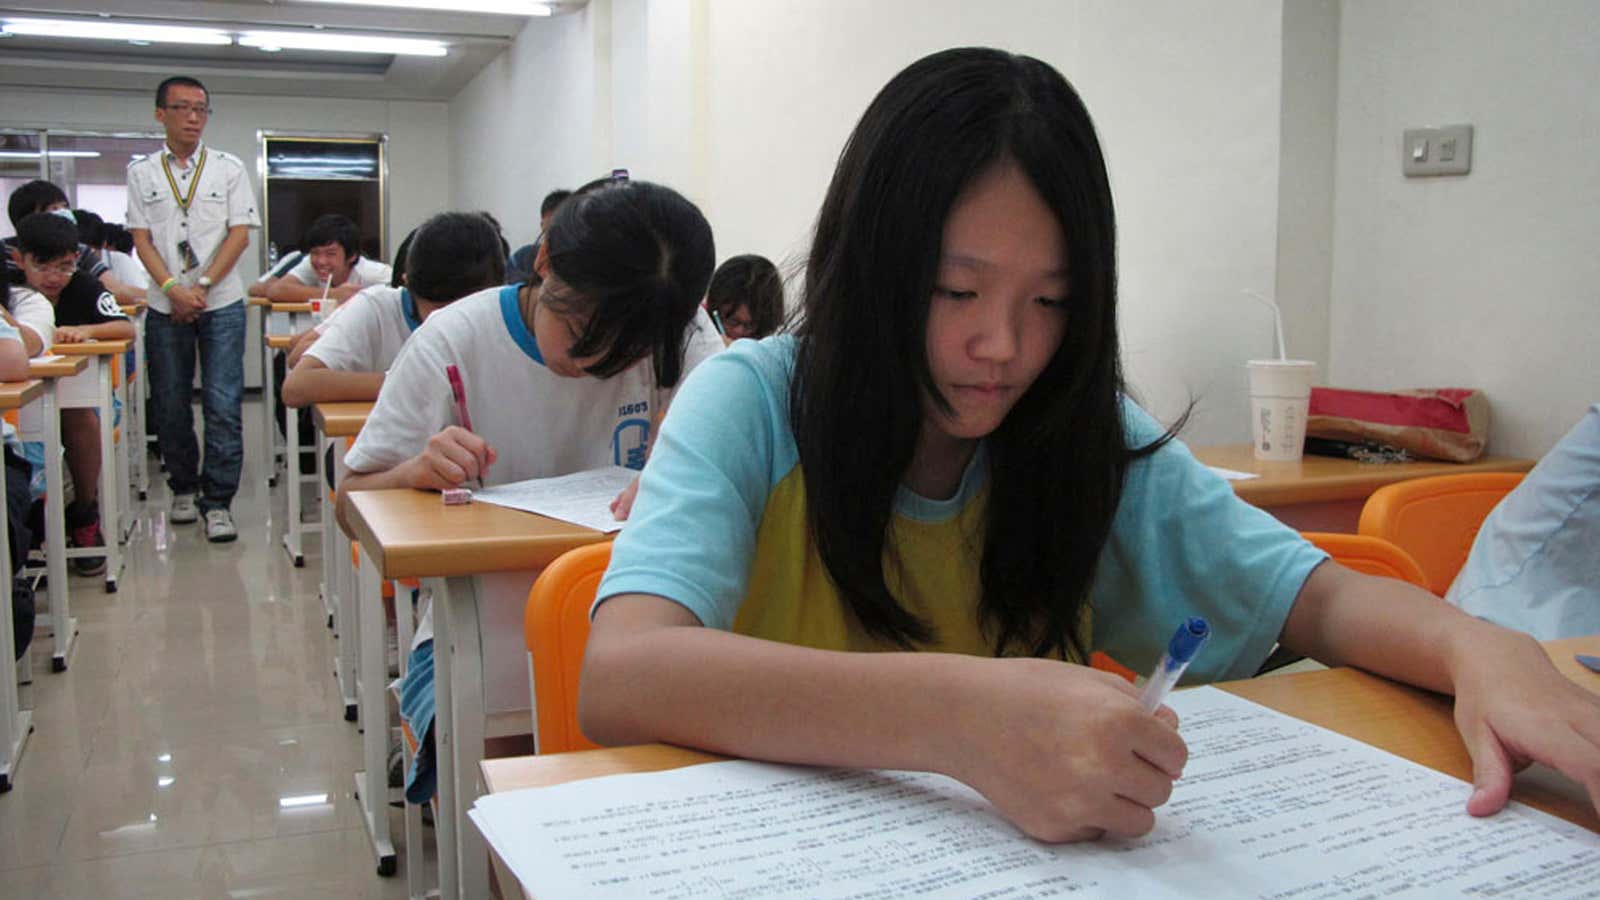 You can absorb a lot of things at a Taiwanese cram school, but your parents’ work ethic may not be one of them.